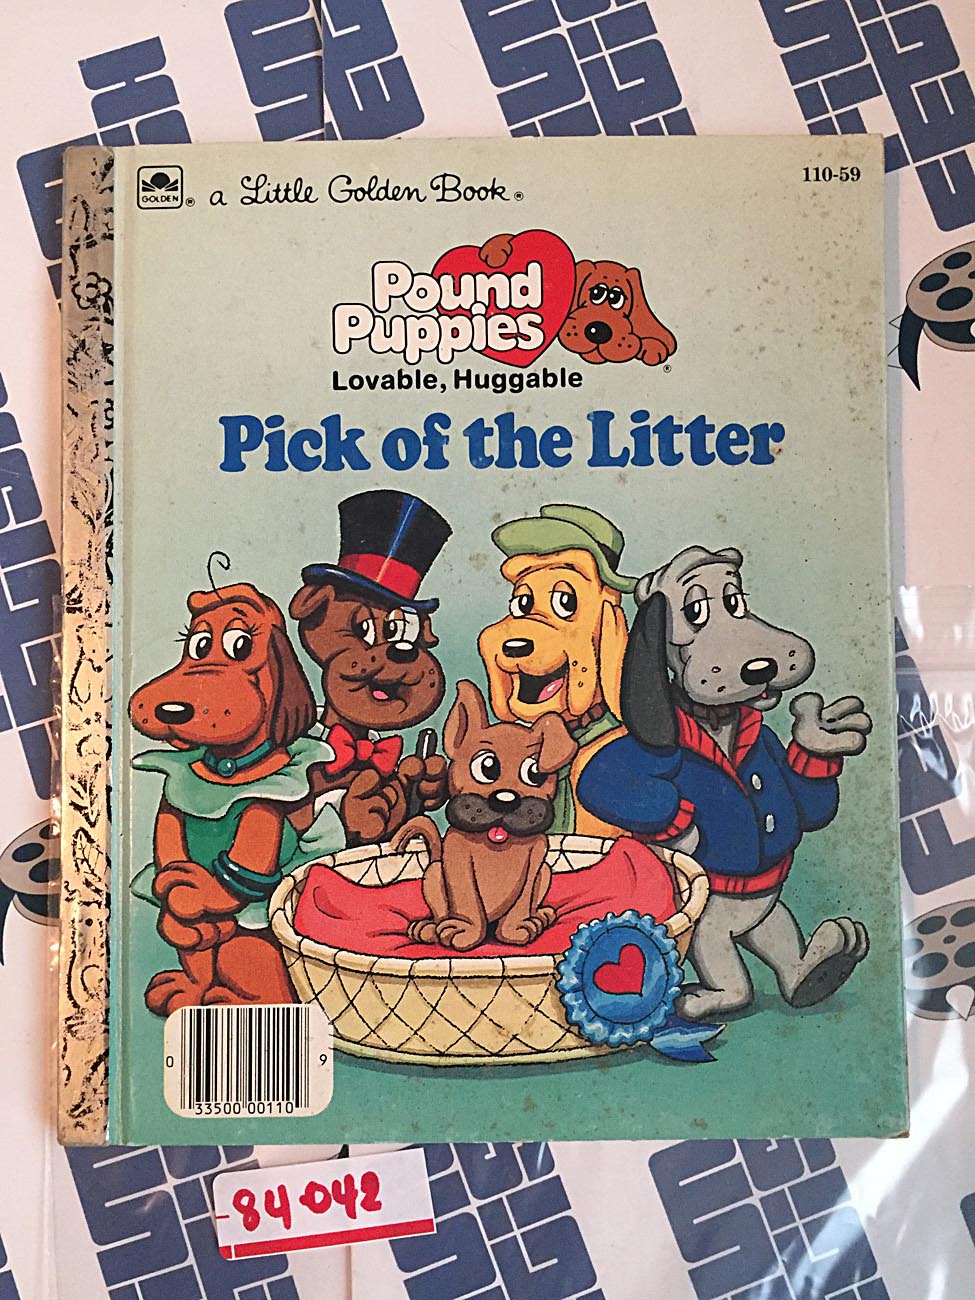 Pound Puppies Lovable Huggable Pick of the Litter A Little Golden Book [84042]